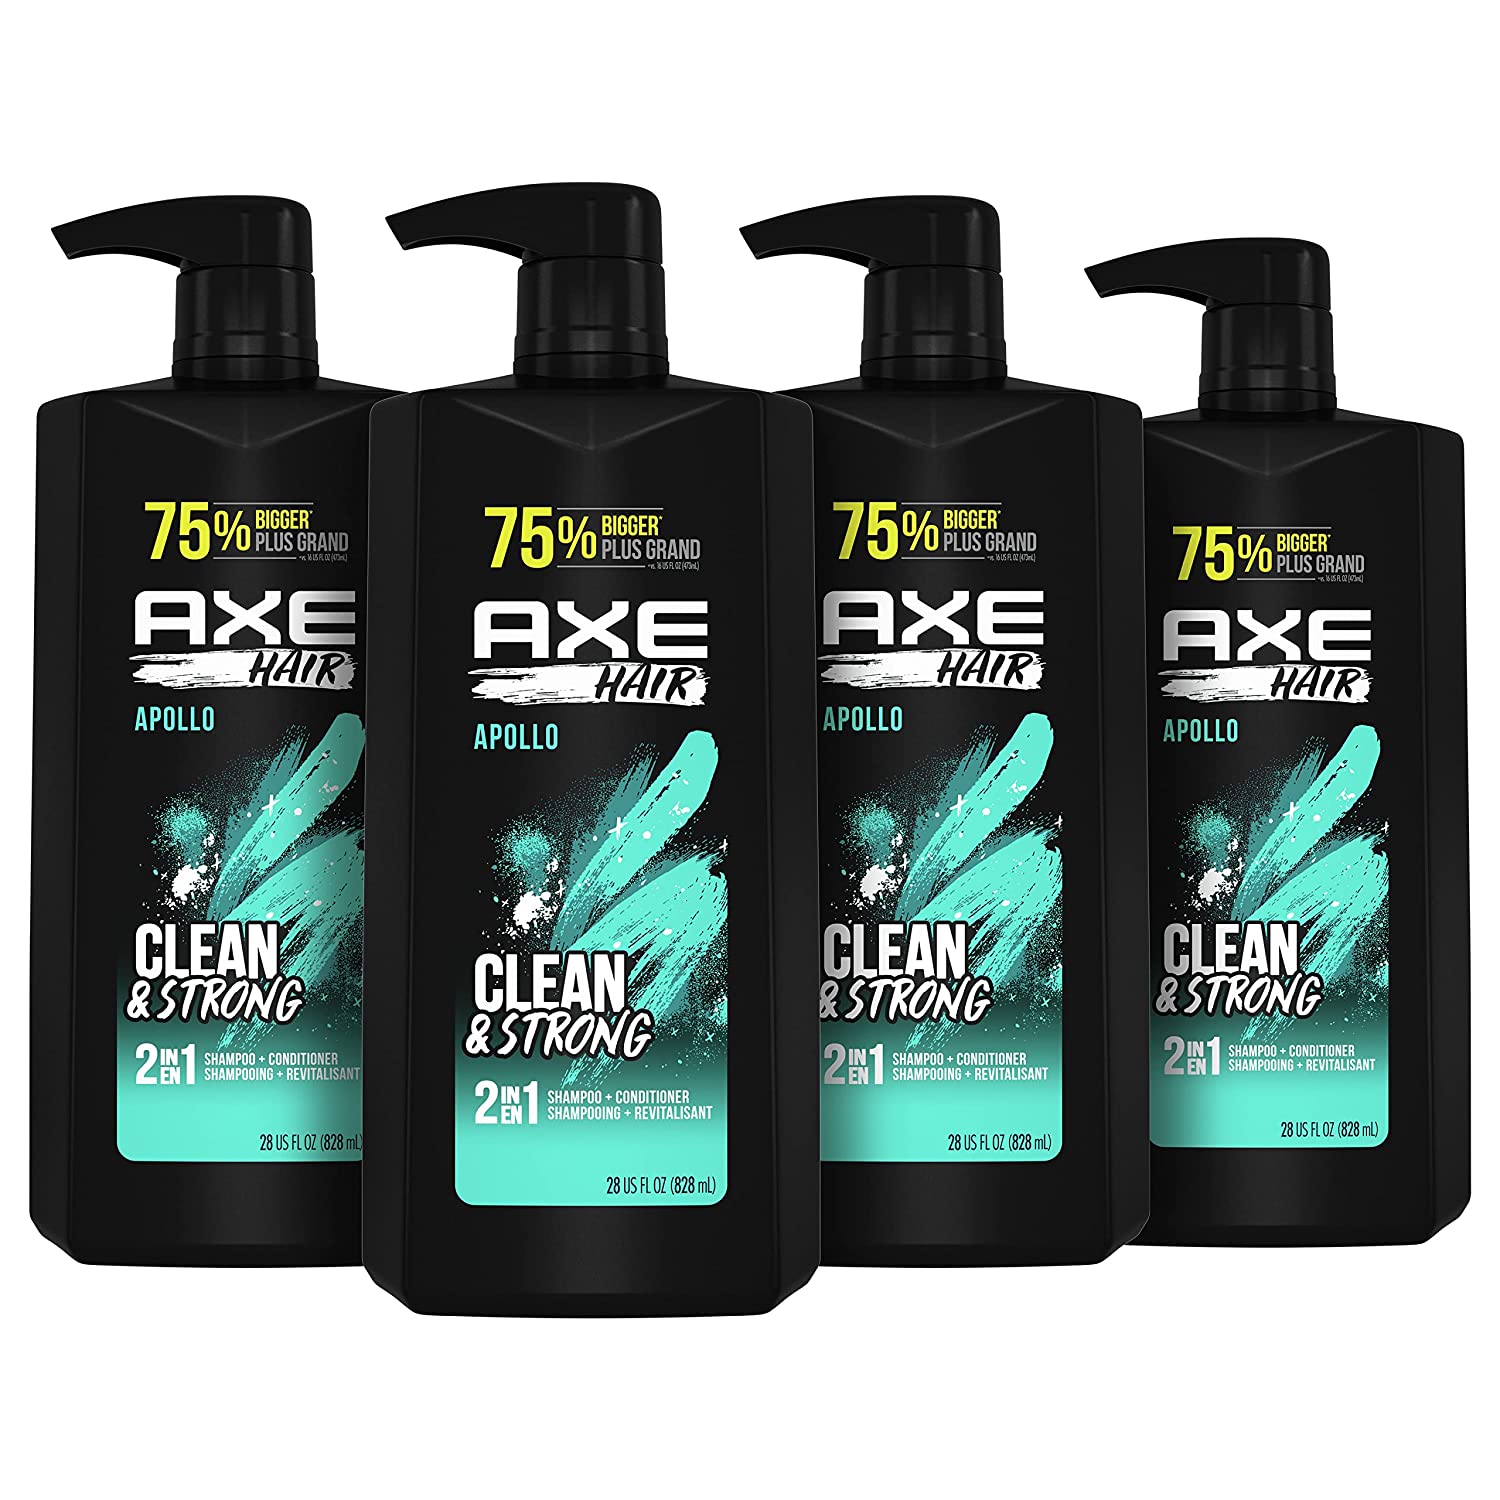 4-Count 28-Oz AXE 2-in-1 Shampoo and Conditioner (Apollo) $15.37 ($3.84 EA) w/ S&S + Free Shipping w/ Prime or Orders $35+